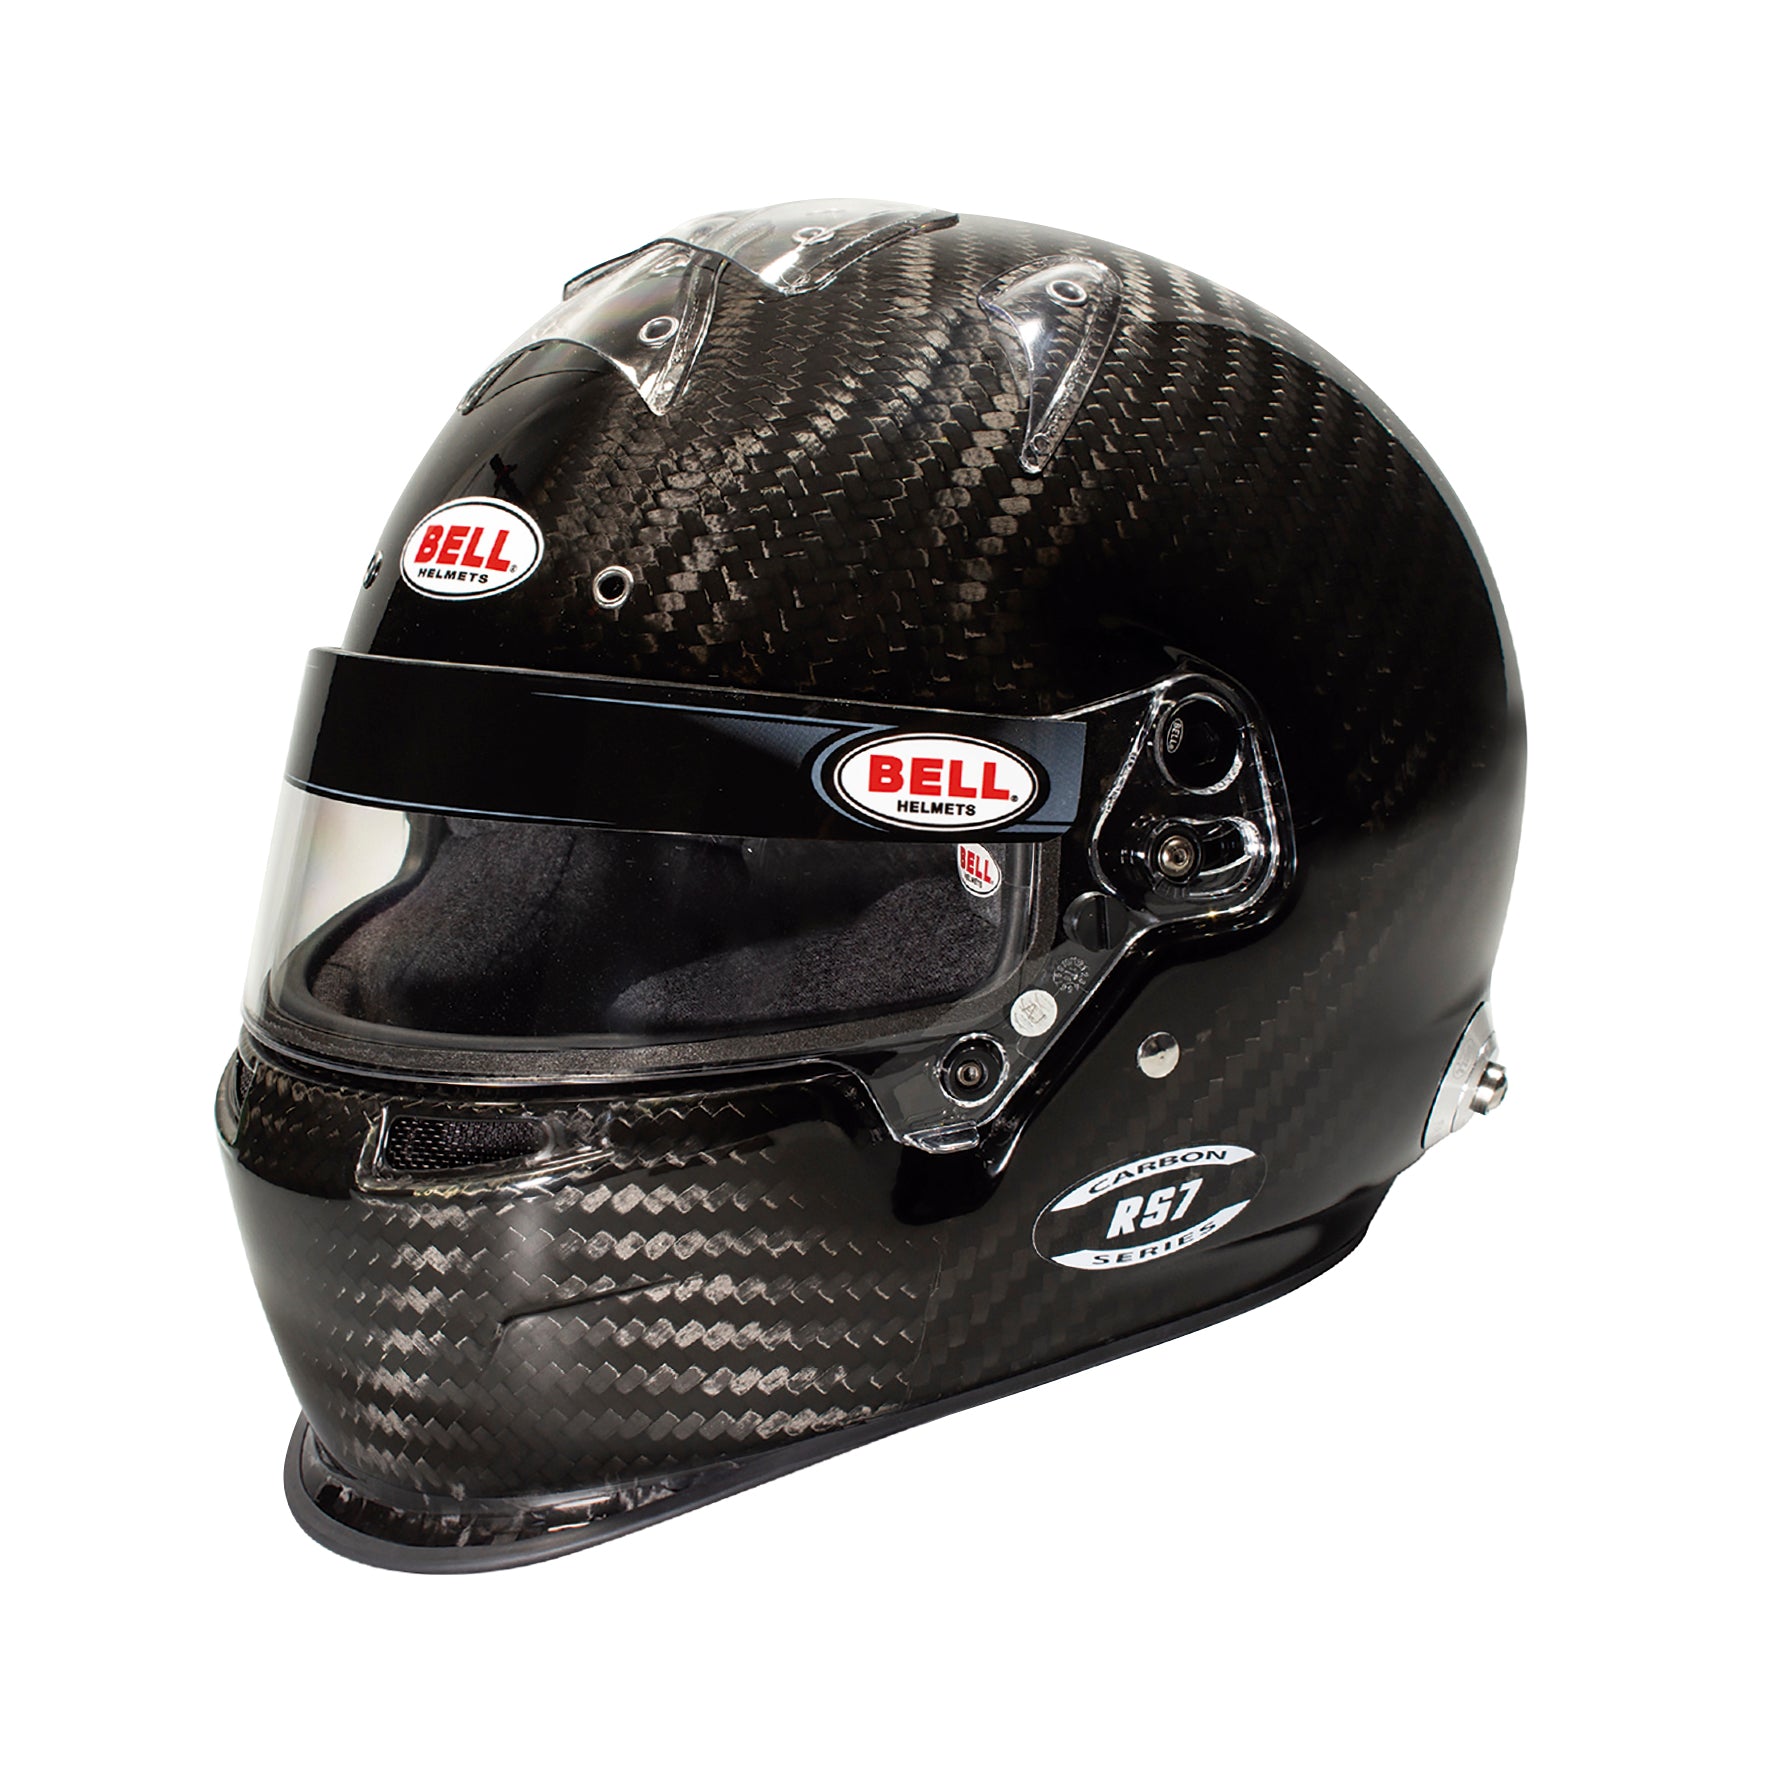 BELL 1204A03 Шолом full face RS7 CARBON DUCKBILL, HANS, FIA, size 56 (7) Photo-1 